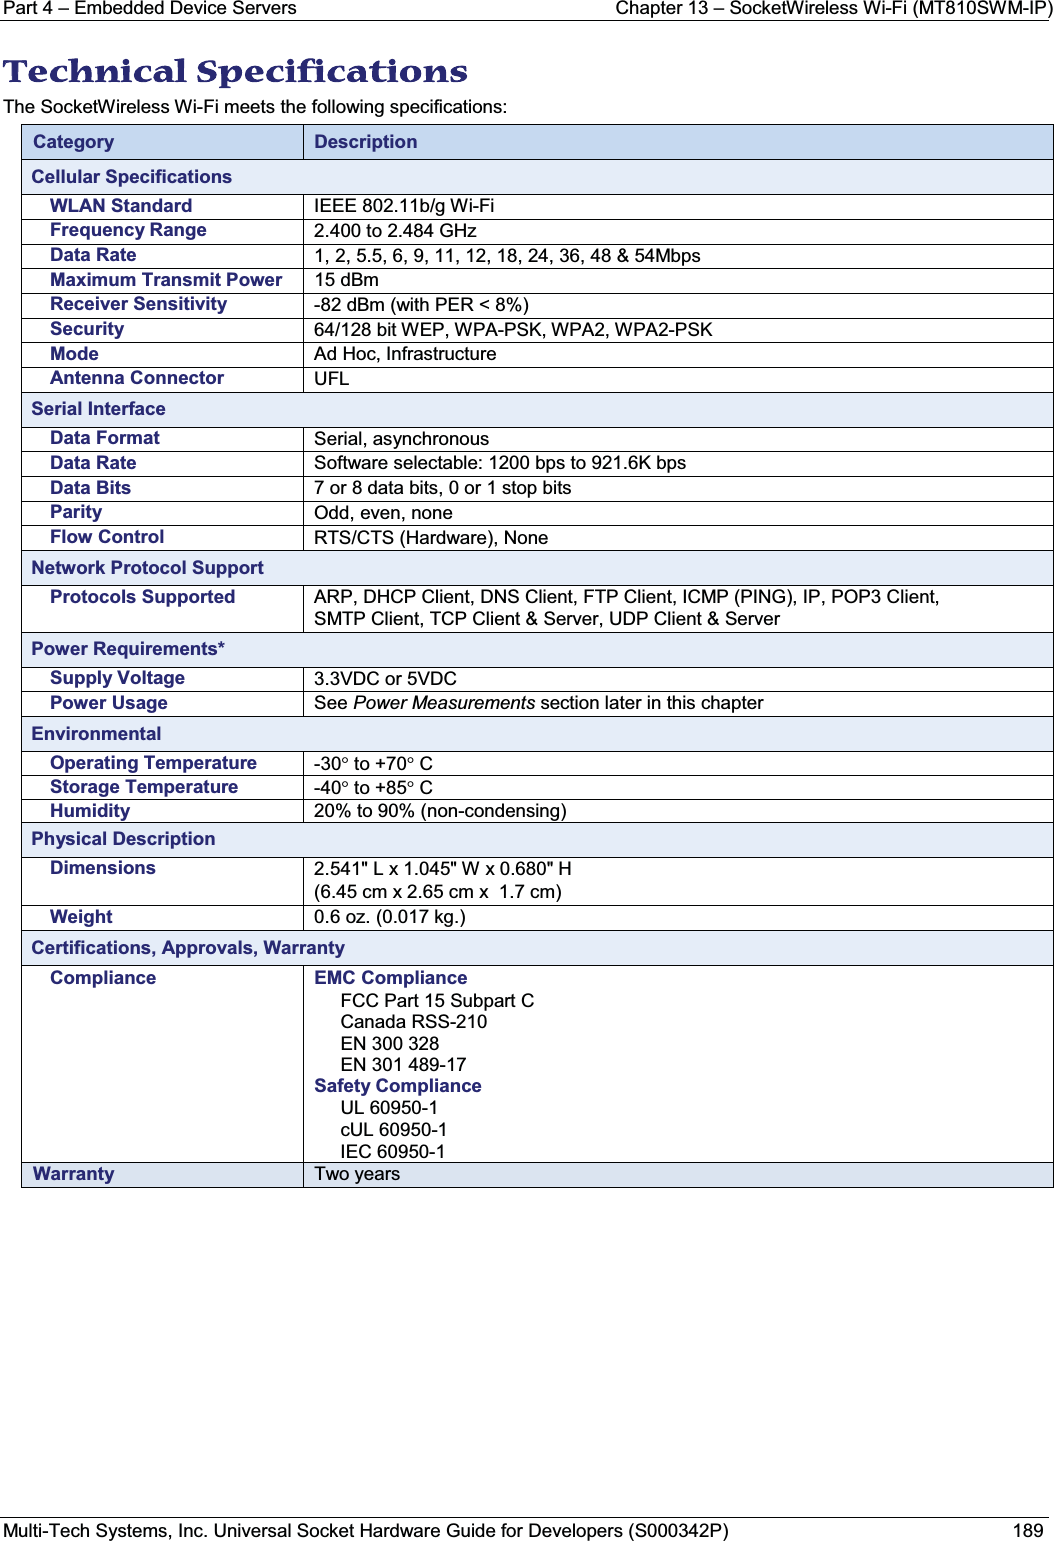 Part 4 – Embedded Device Servers Chapter 13 – SocketWireless Wi-Fi (MT810SWM-IP)Multi-Tech Systems, Inc. Universal Socket Hardware Guide for Developers (S000342P) 189TTechnical Specifications The SocketWireless Wi-Fi meets the following specifications: Category DescriptionCellular SpecificationsWLAN Standard IEEE 802.11b/g Wi-FiFrequency Range 2.400 to 2.484 GHzData Rate 1, 2, 5.5, 6, 9, 11, 12, 18, 24, 36, 48 &amp; 54MbpsMaximum Transmit Power 15 dBmReceiver Sensitivity -82 dBm (with PER &lt; 8%)Security 64/128 bit WEP, WPA-PSK, WPA2, WPA2-PSKMode Ad Hoc, InfrastructureAntenna Connector UFLSerial InterfaceData Format Serial, asynchronousData Rate Software selectable: 1200 bps to 921.6K bpsData Bits 7 or 8 data bits, 0 or 1 stop bitsParity Odd, even, noneFlow Control RTS/CTS (Hardware), NoneNetwork Protocol SupportProtocols Supported ARP, DHCP Client, DNS Client, FTP Client, ICMP (PING), IP, POP3 Client,SMTP Client, TCP Client &amp; Server, UDP Client &amp; ServerPower Requirements*Supply Voltage 3.3VDC or 5VDCPower Usage See Power Measurements section later in this chapterEnvironmentalOperating Temperature -30qto +70qCStorage Temperature -40qto +85qCHumidity 20% to 90% (non-condensing)   Physical DescriptionDimensions 2.541&quot; L x 1.045&quot; W x 0.680&quot; H(6.45 cm x 2.65 cm x  1.7 cm)Weight 0.6 oz. (0.017 kg.)Certifications, Approvals, WarrantyCompliance EMC ComplianceFCC Part 15 Subpart CCanada RSS-210EN 300 328EN 301 489-17Safety ComplianceUL 60950-1cUL 60950-1IEC 60950-1Warranty Two years